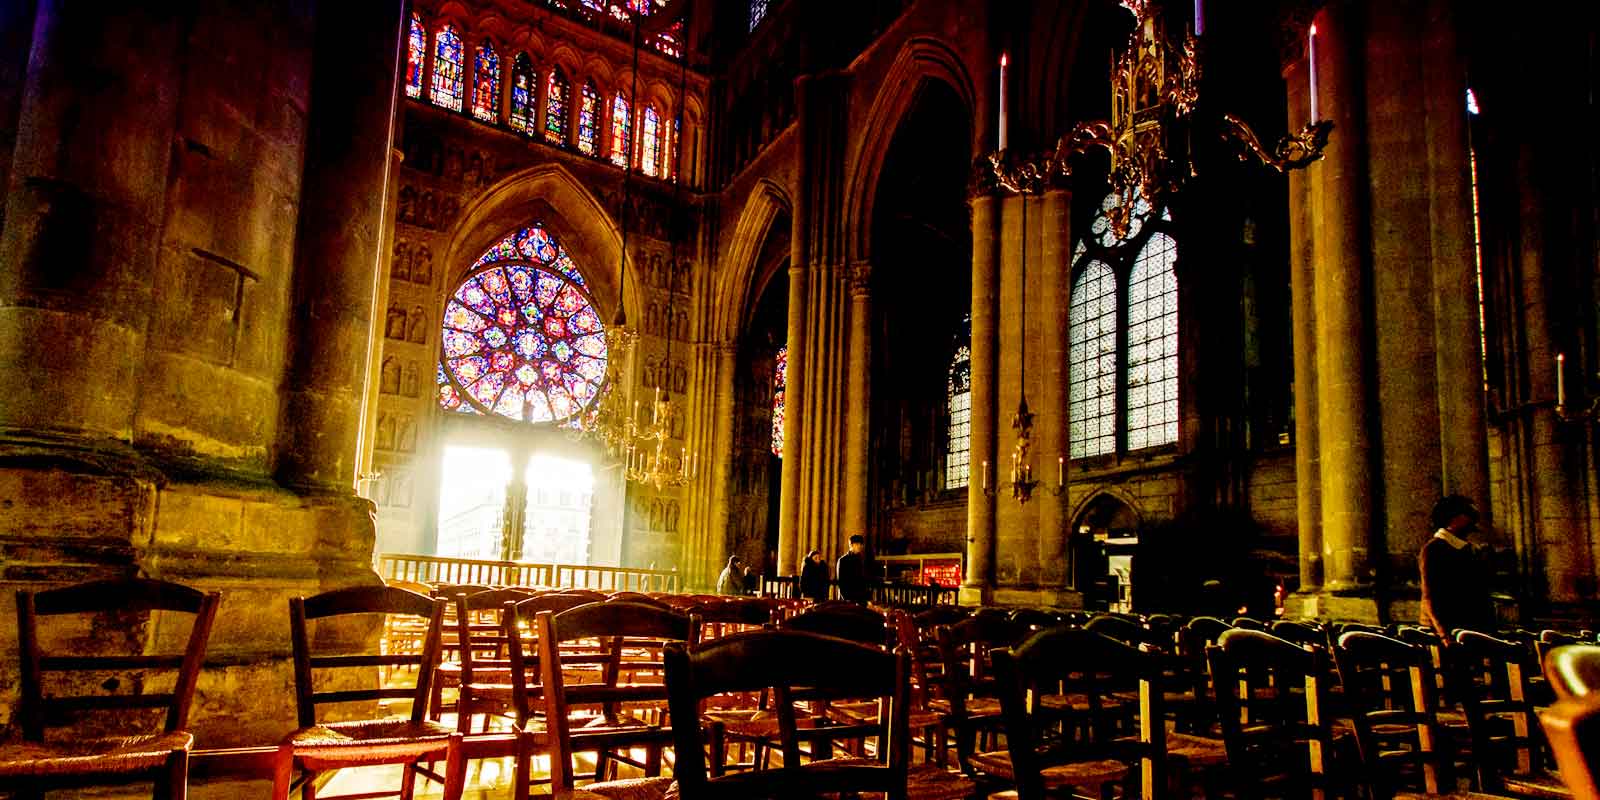 Landscape view inside the Notre Dame de Reims church, including the sun shining through a stained glass window.